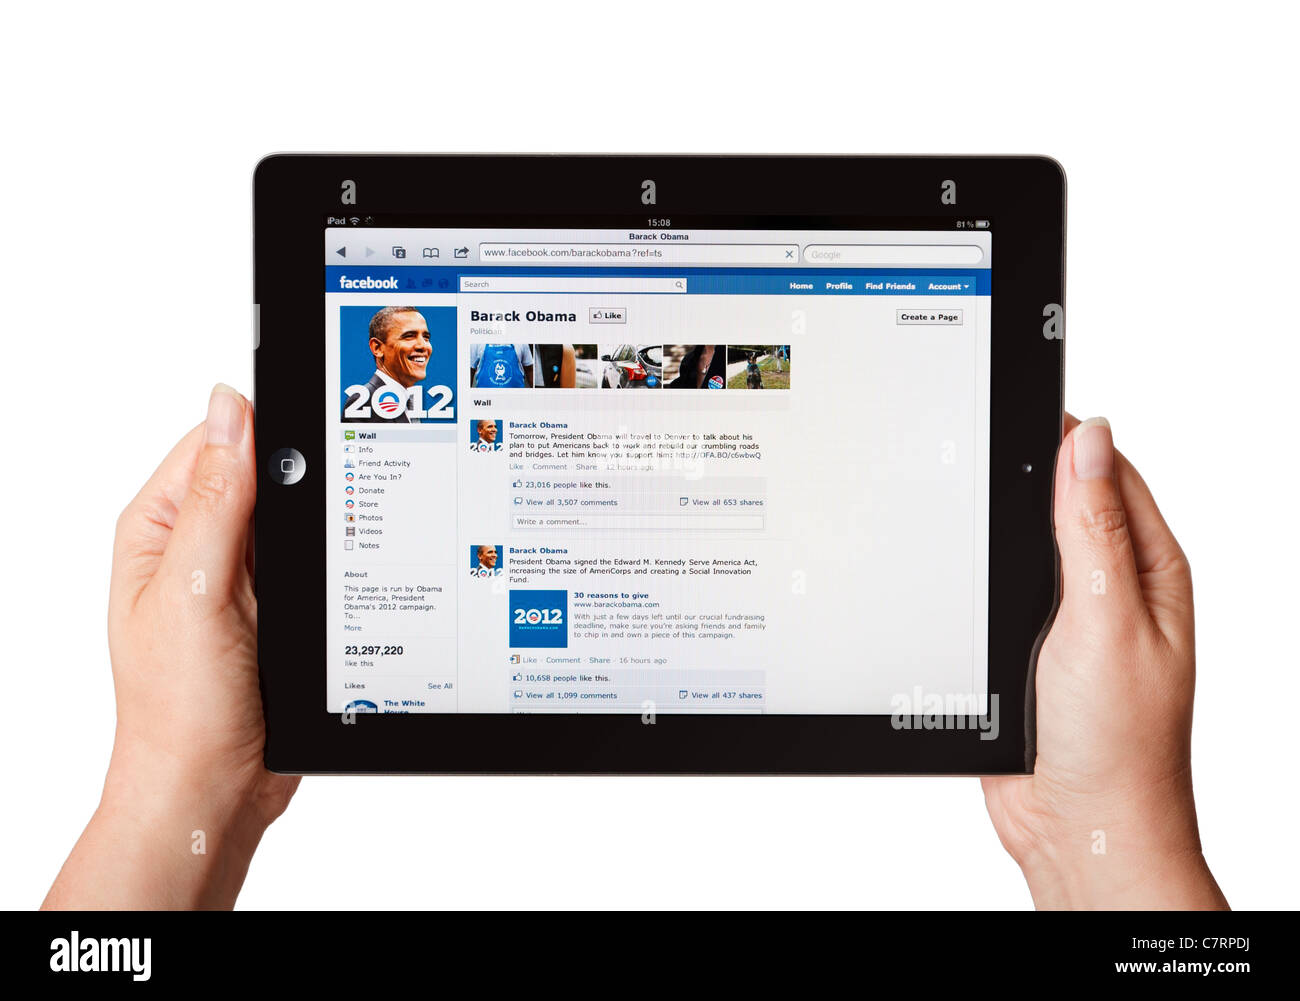 Hands holding iPad showing Barack Obama's political campaign Facebook page Stock Photo